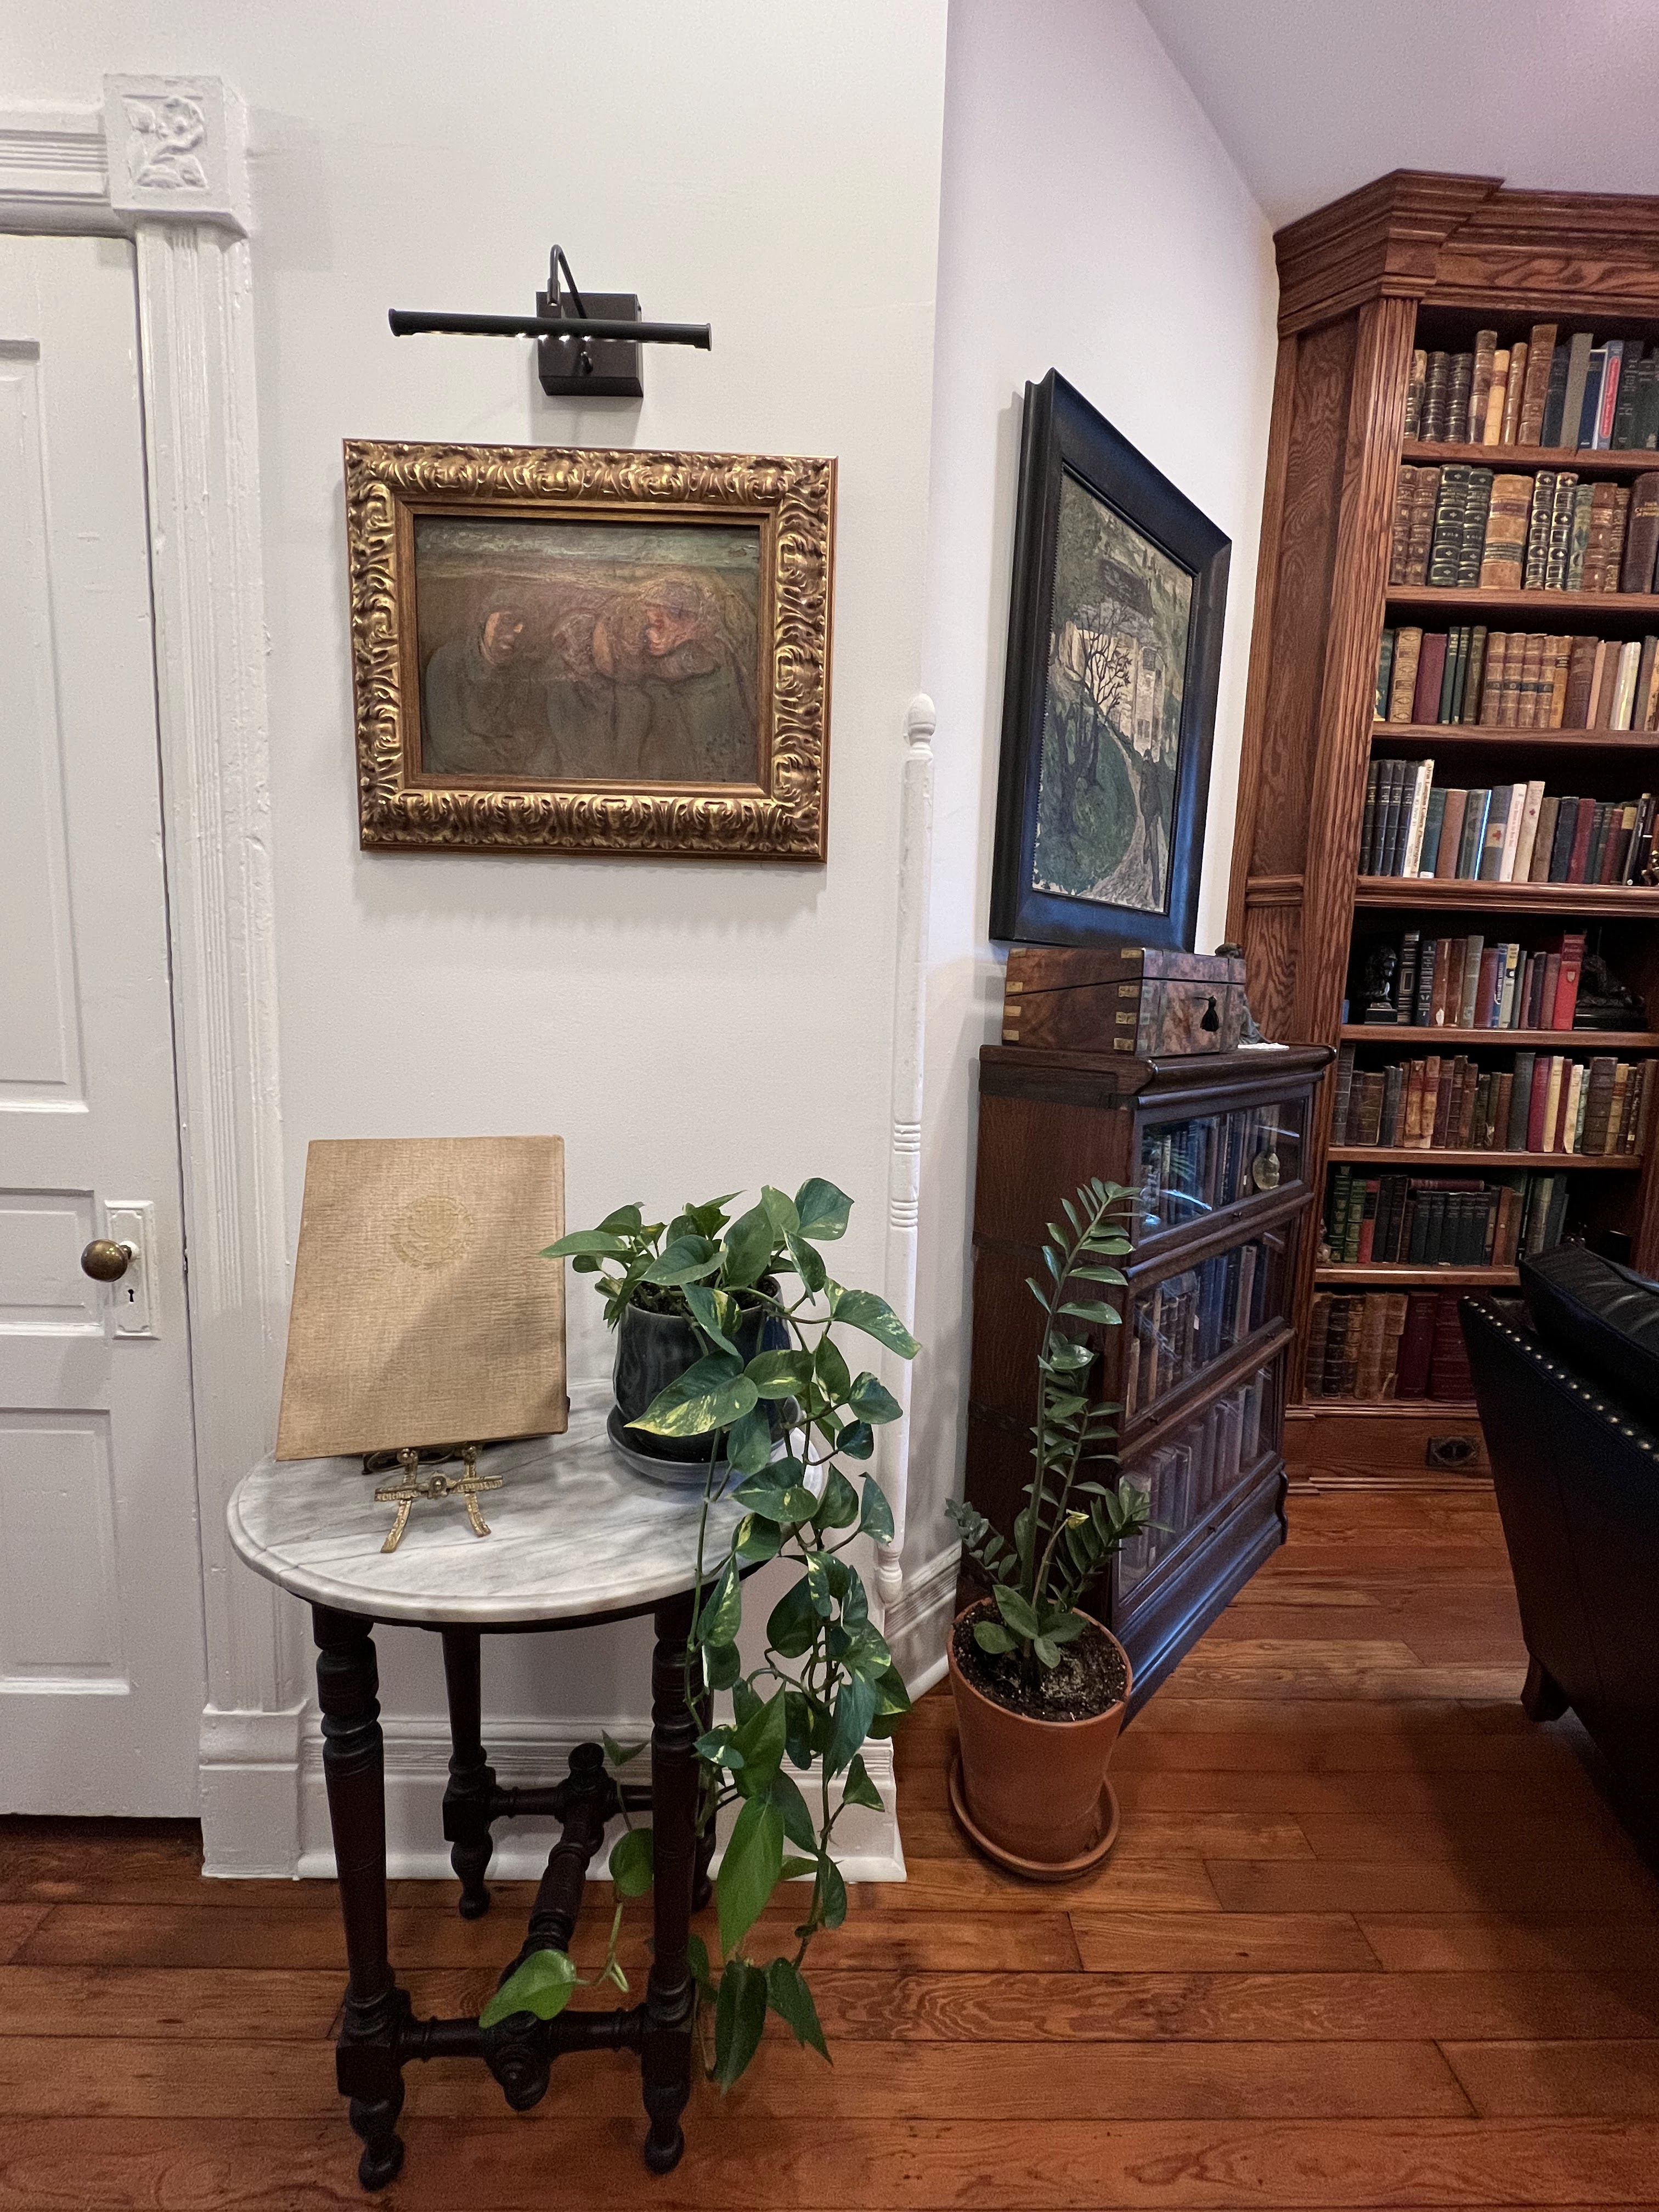 A cozy corner with a round table, plants, paintings, and a bookcase filled with books.